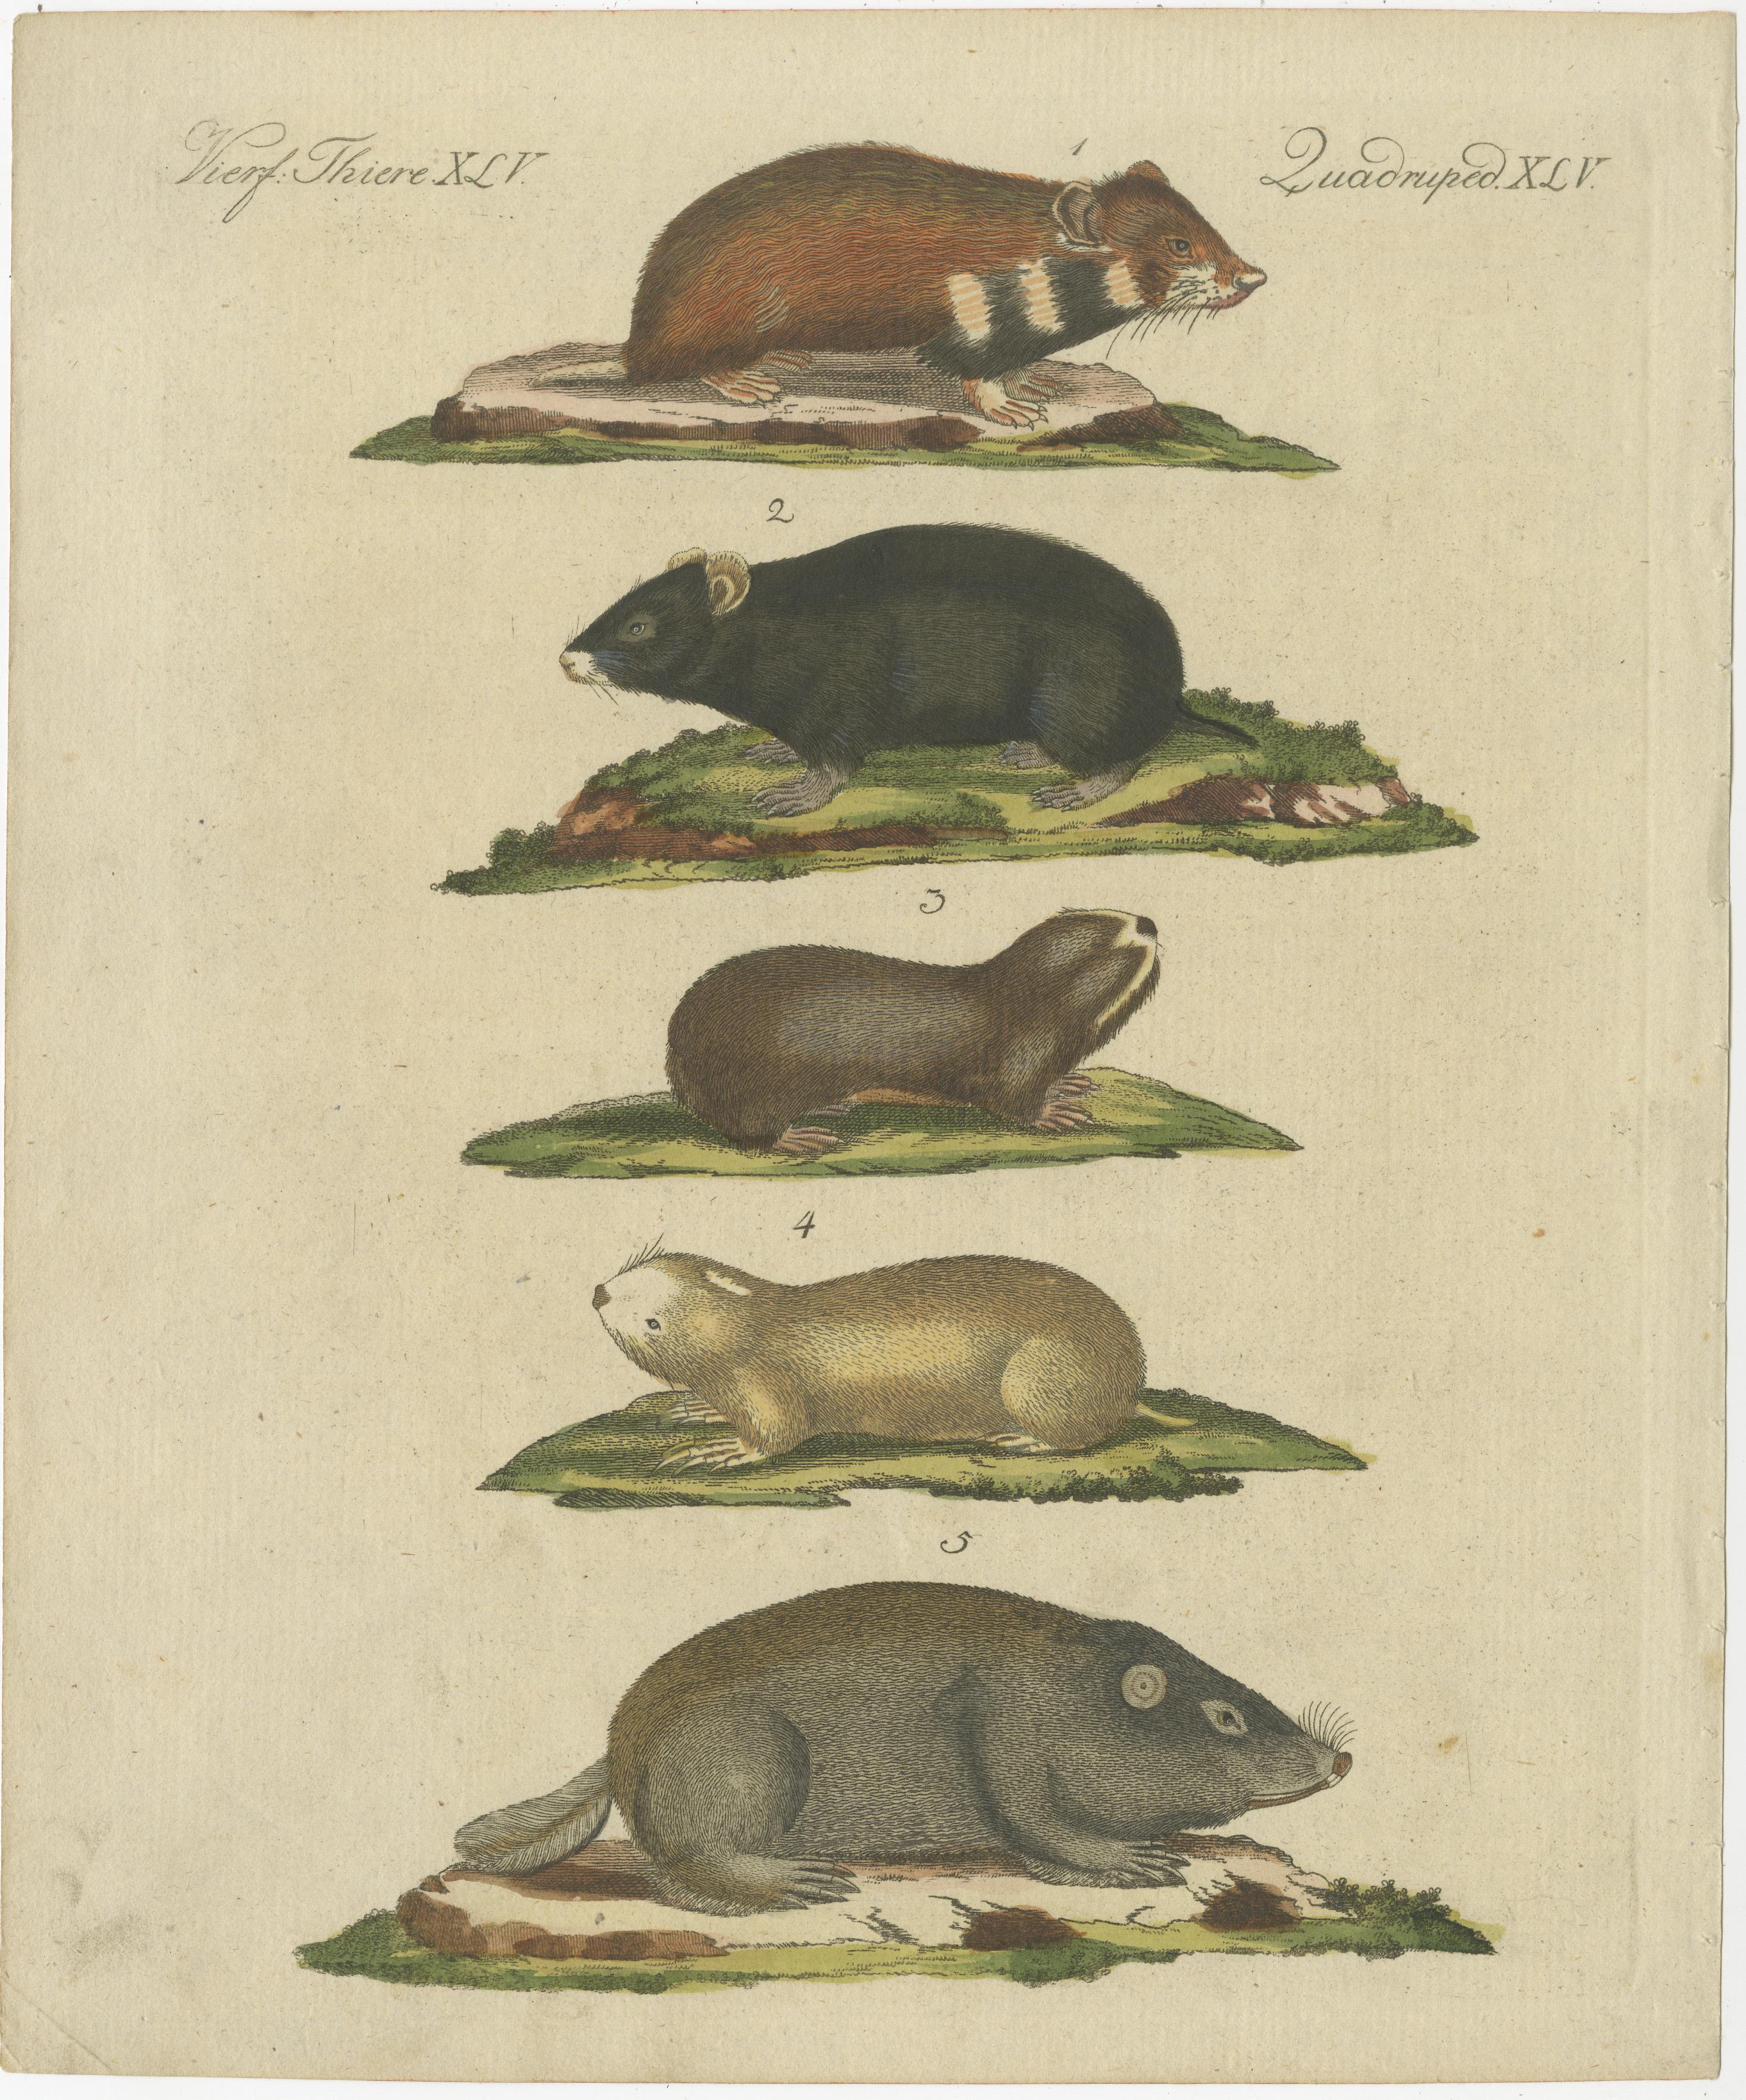 Original antique print of hamsters and field rats. This print originates from 'Bilderbuch fur Kinder' by F.J. Bertuch. Friedrich Johann Bertuch (1747-1822) was a German publisher and man of arts most famous for his 12-volume encyclopedia for